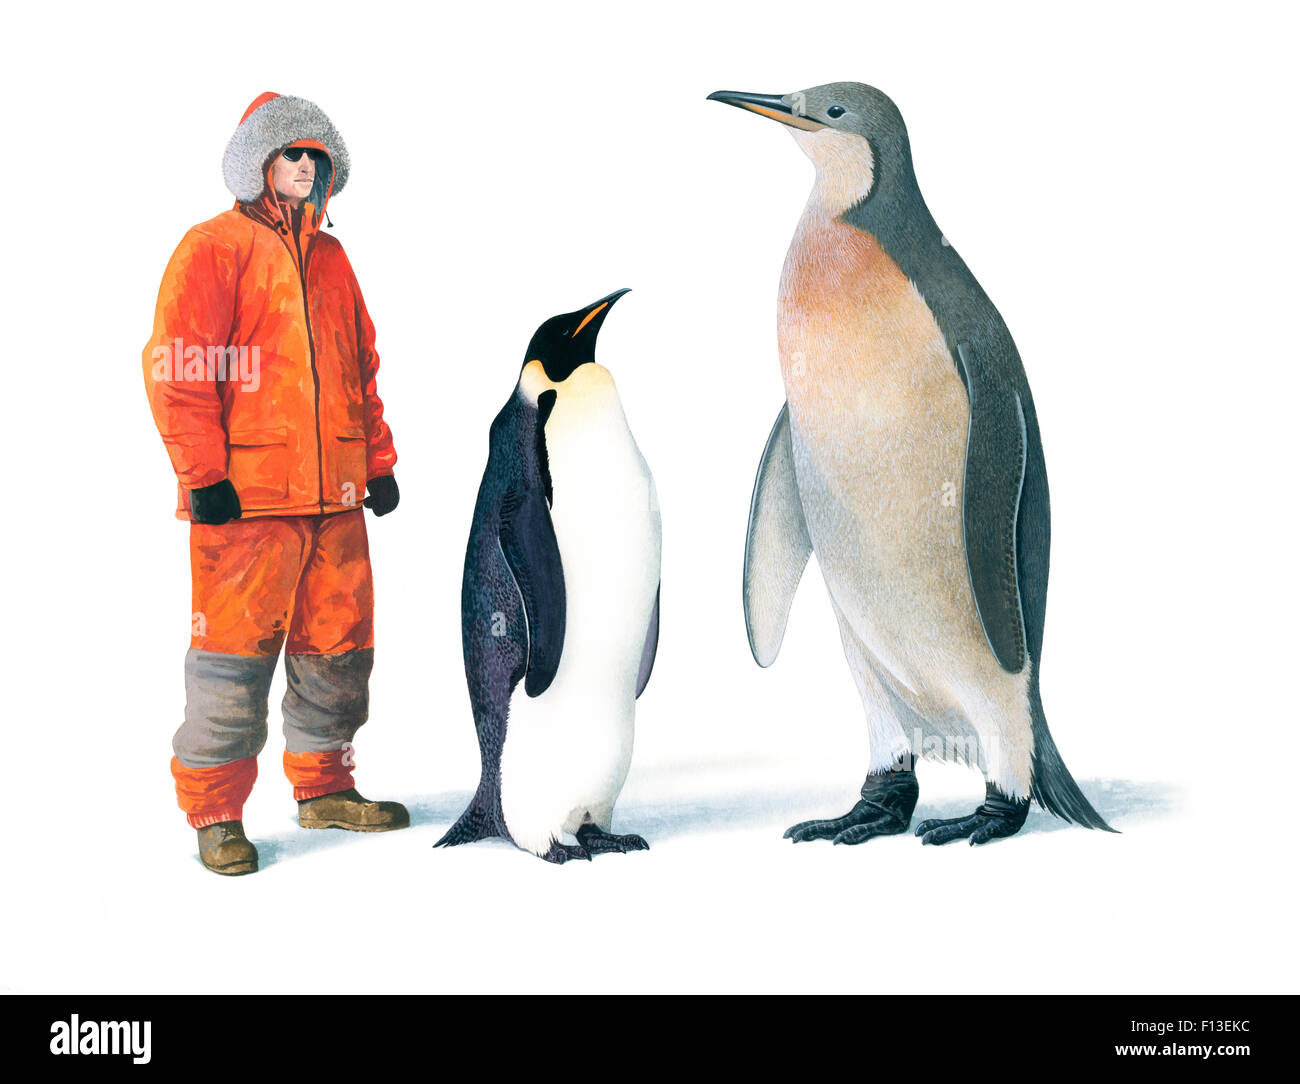 Illustration Of Extinct Mega Penguin (Palaeeudyptes Klekowskii) With Human And Emperor Penguin (Aptenodytes Forsteri) For Scale. Mega Penguins Were The Largest And Heaviest Penguins Ever, With This Species Reaching 2 Metres In